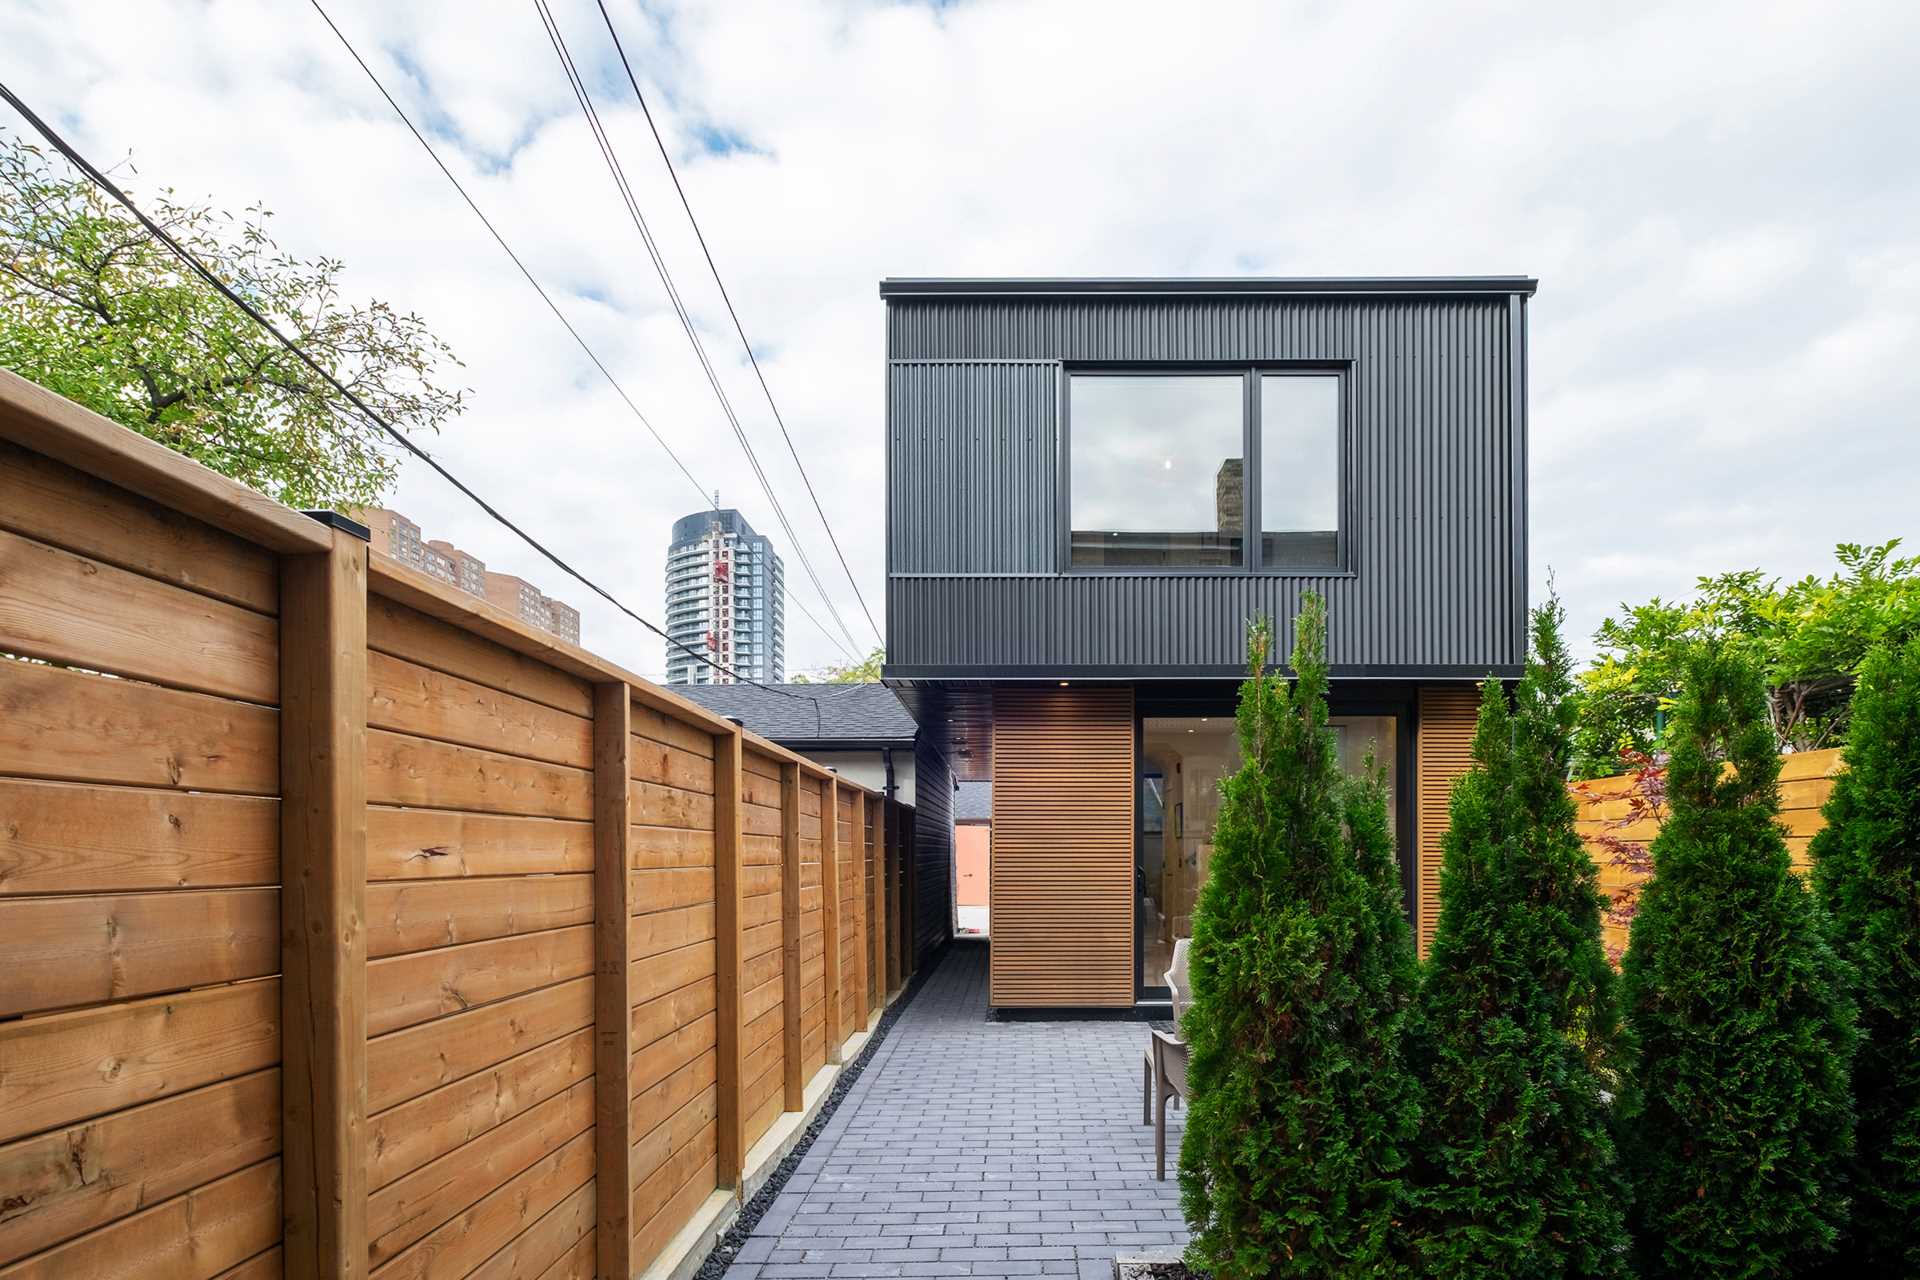 From the patio, you can see how the second floor of the laneway house cantilevers outward, which provides an additional 3 feet of livable space inside.